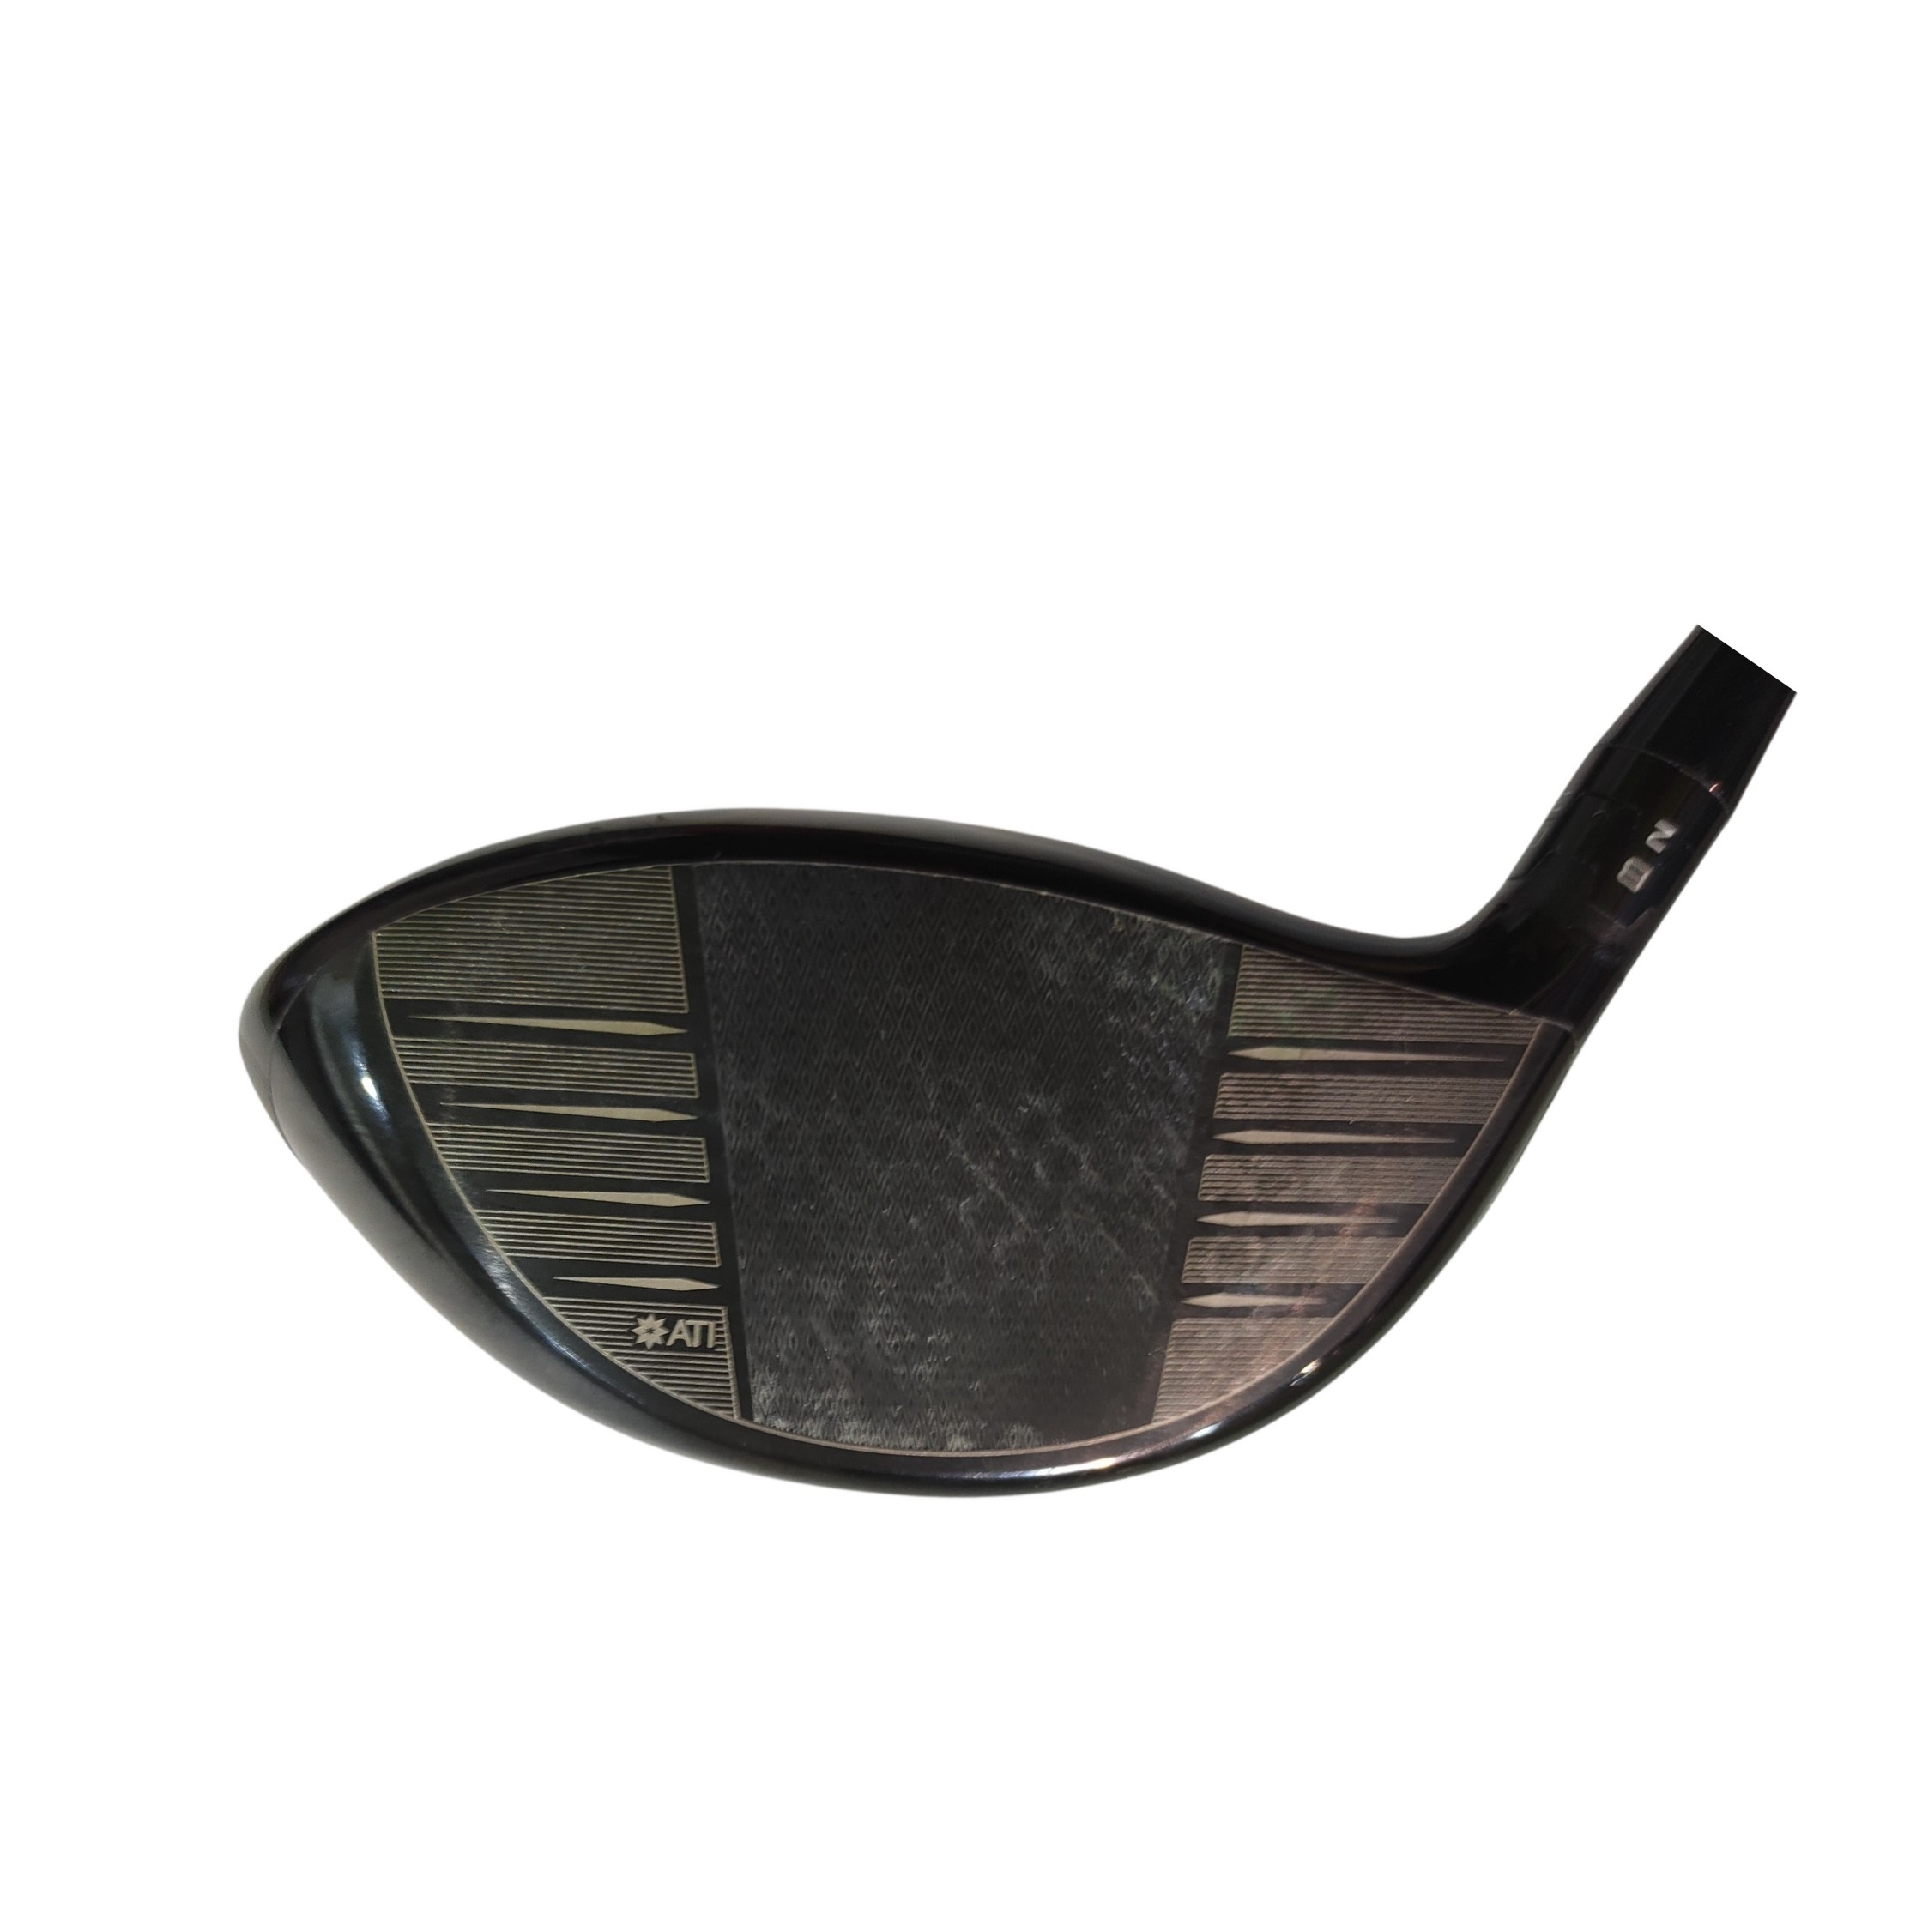 Pre-owned Titleist TSI 2 Men's Driver